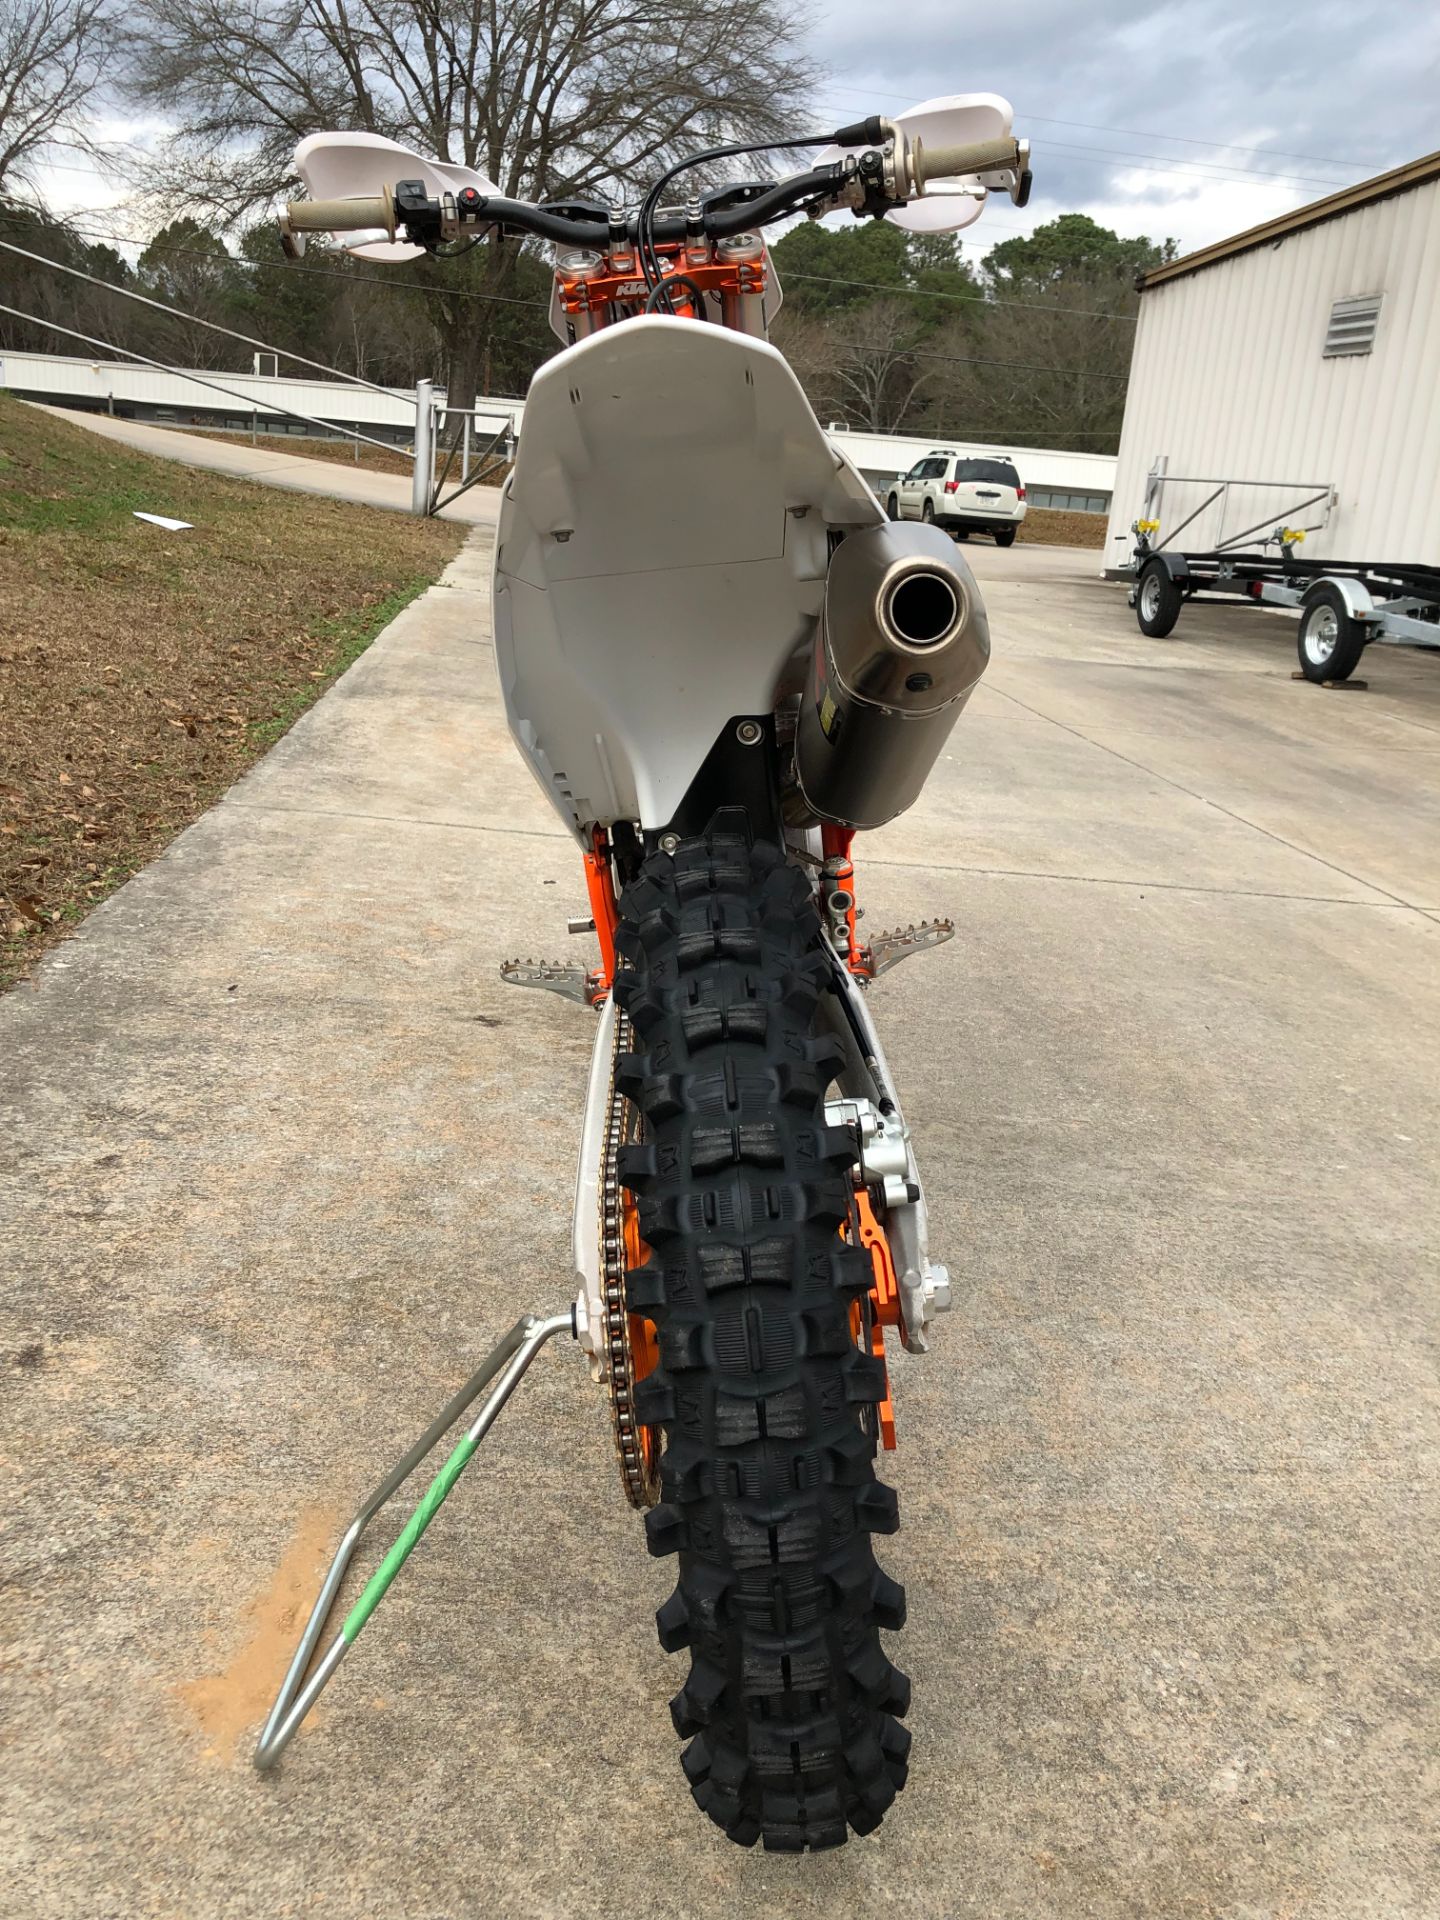 2019 KTM 450 SX-F Factory Edition in Fayetteville, Georgia - Photo 10